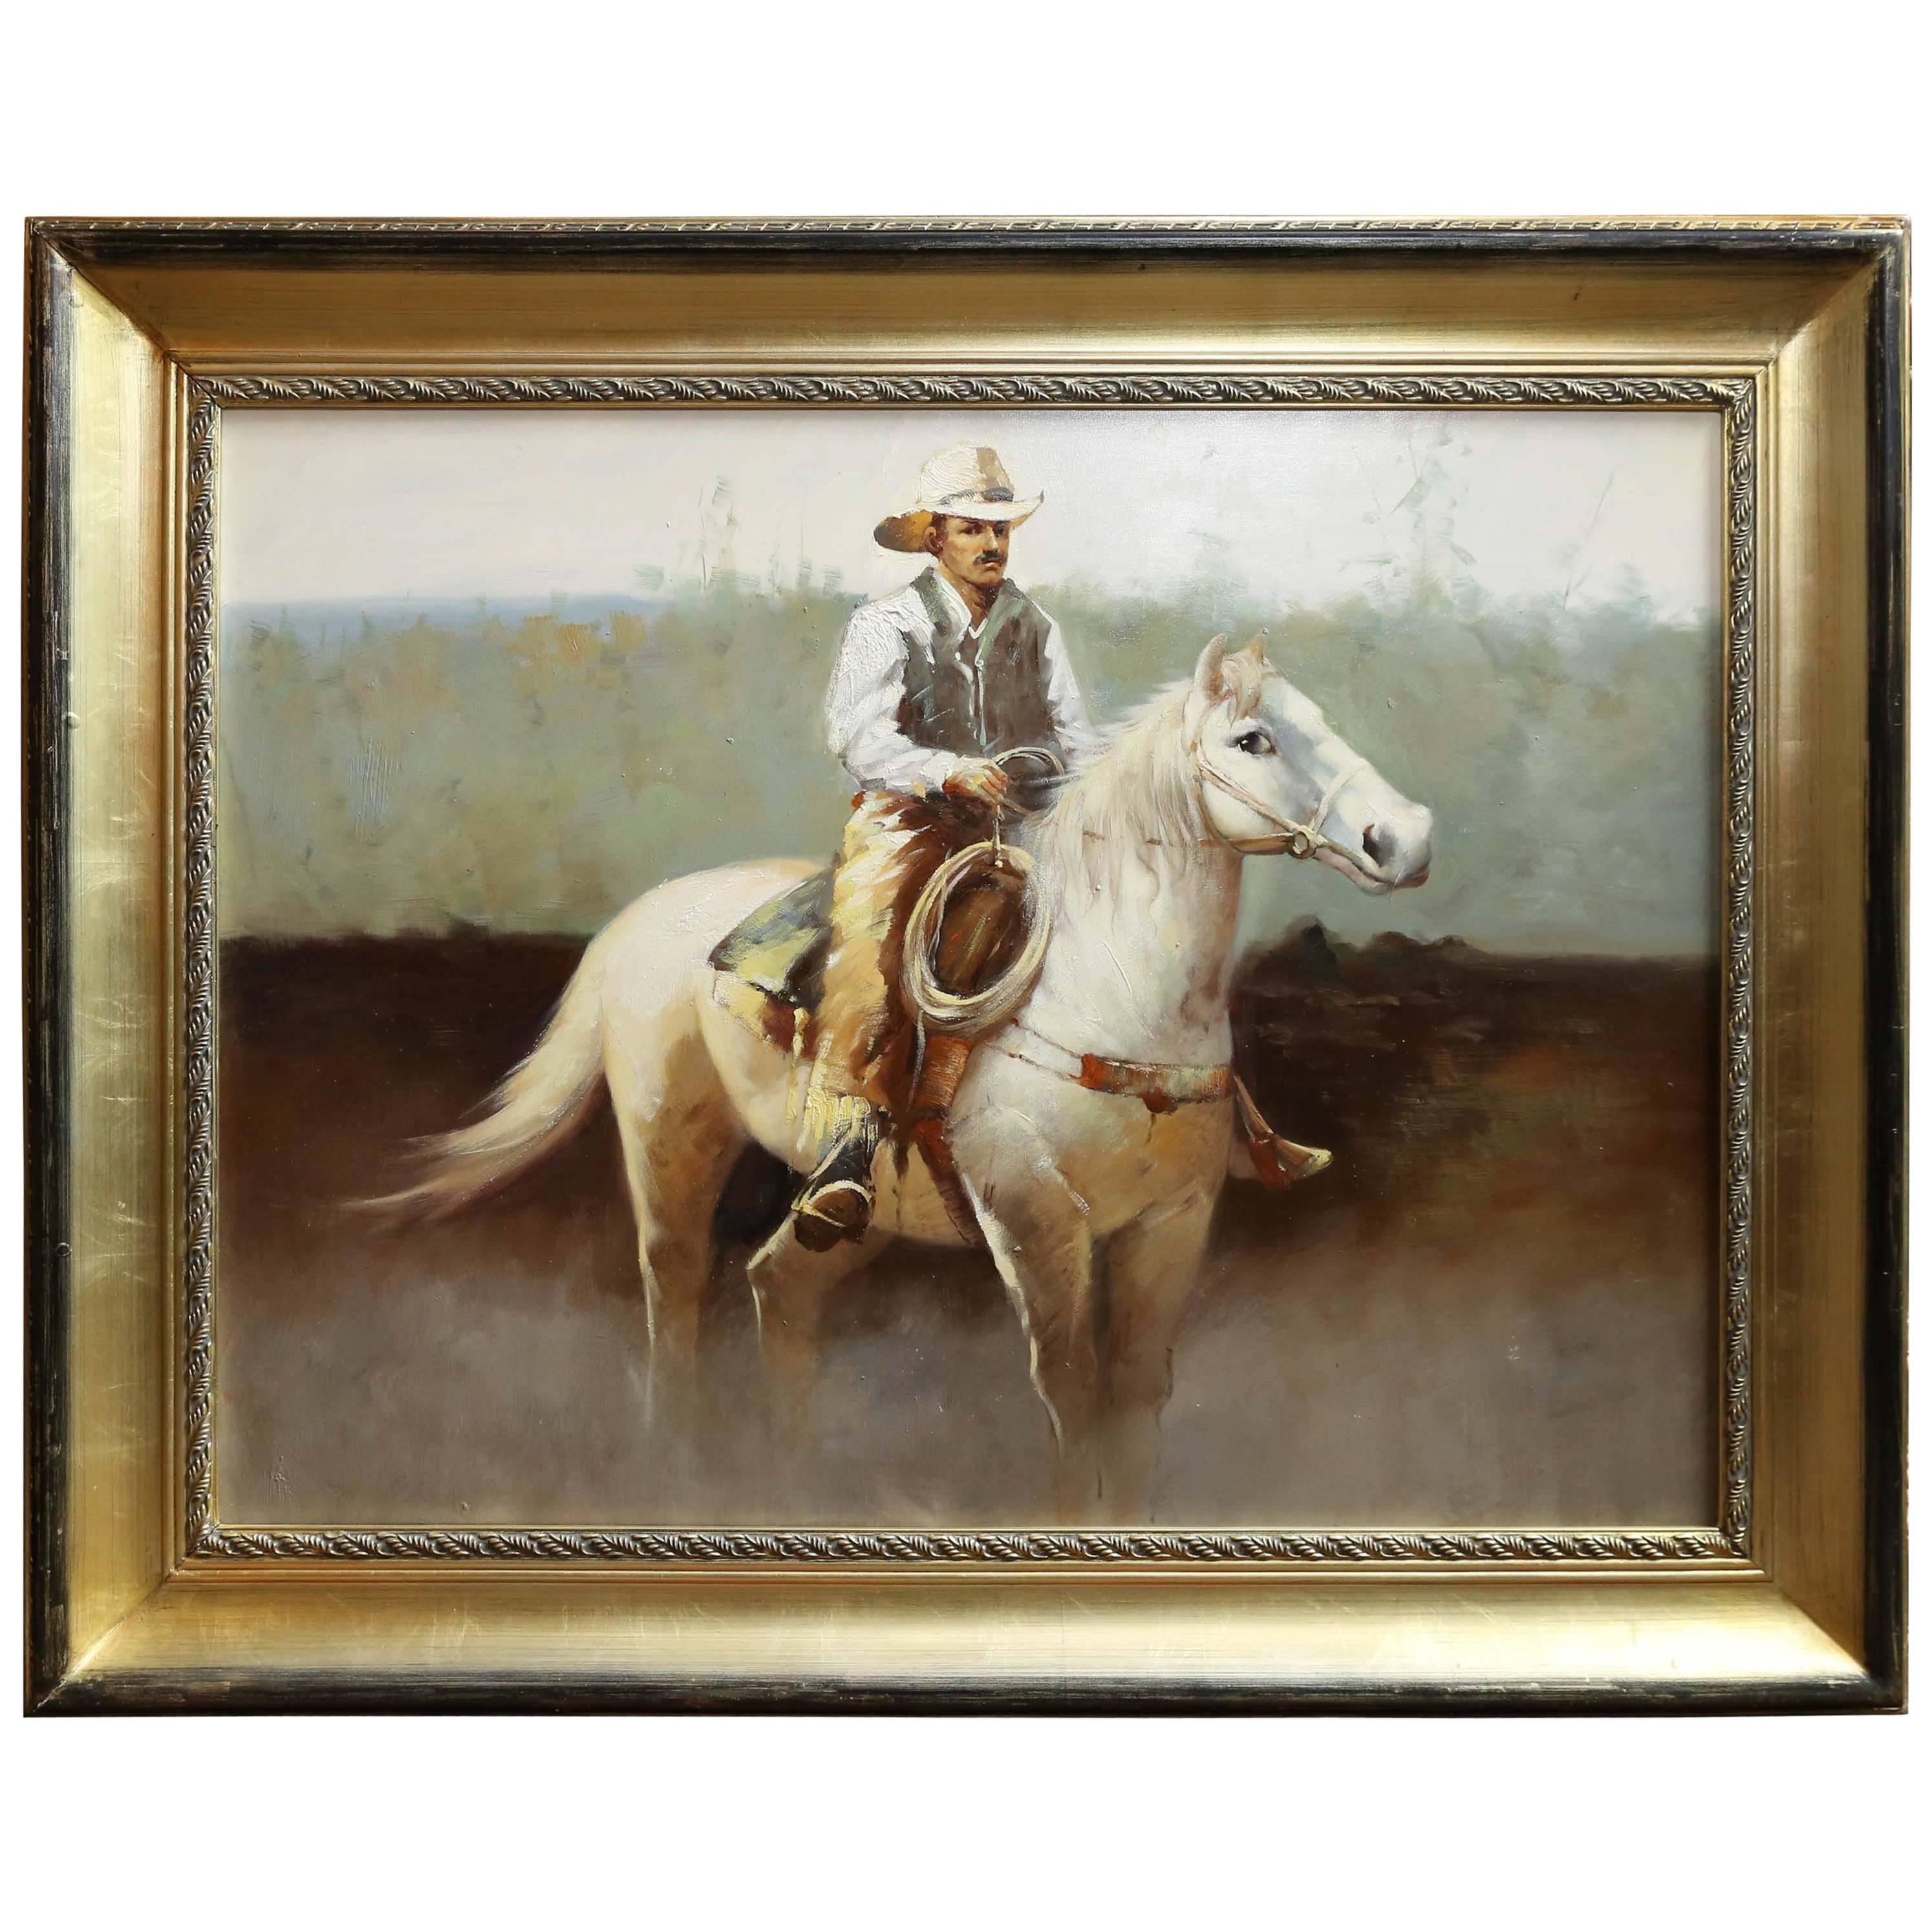 Western Oil on Canvas of a Cowboy On horse back